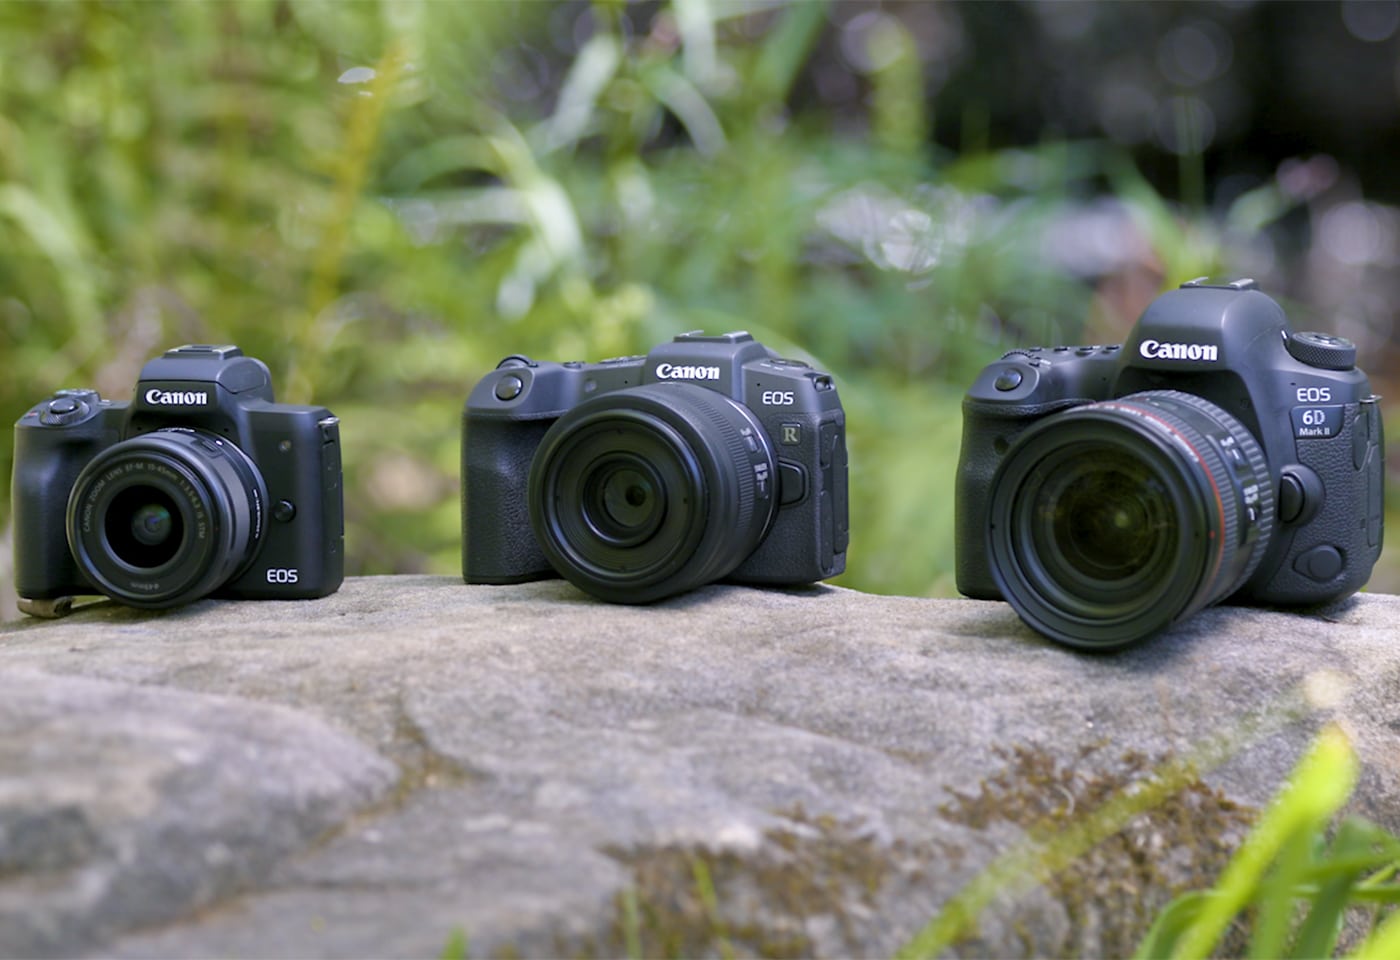 What Is The Difference Between A Digital Camera And A DSLR Camera